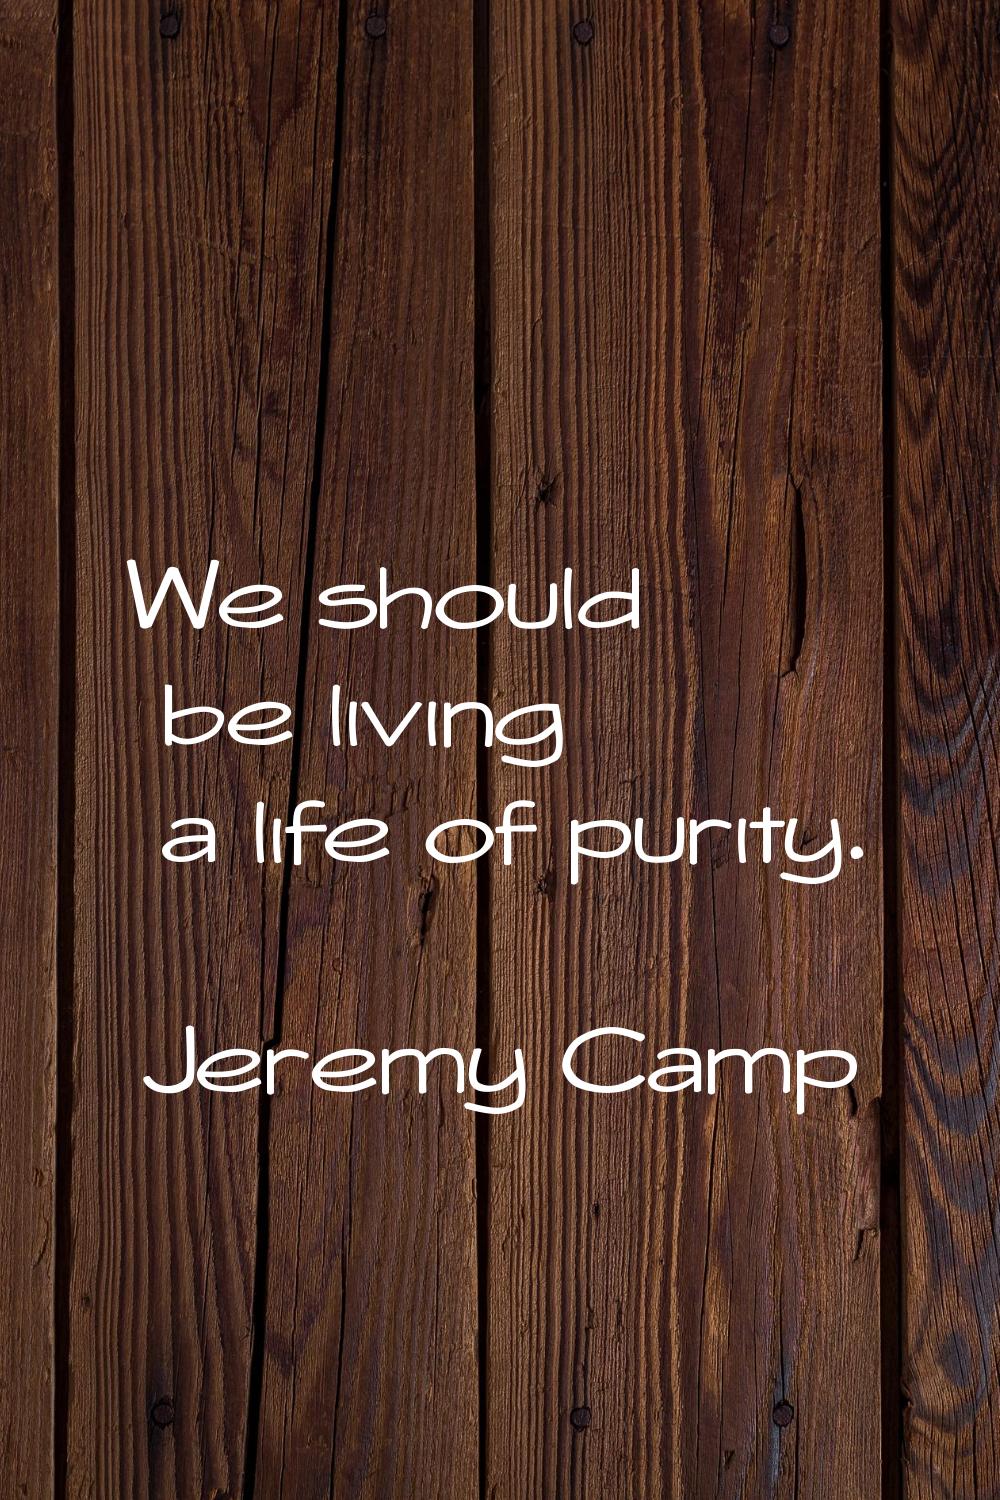 We should be living a life of purity.